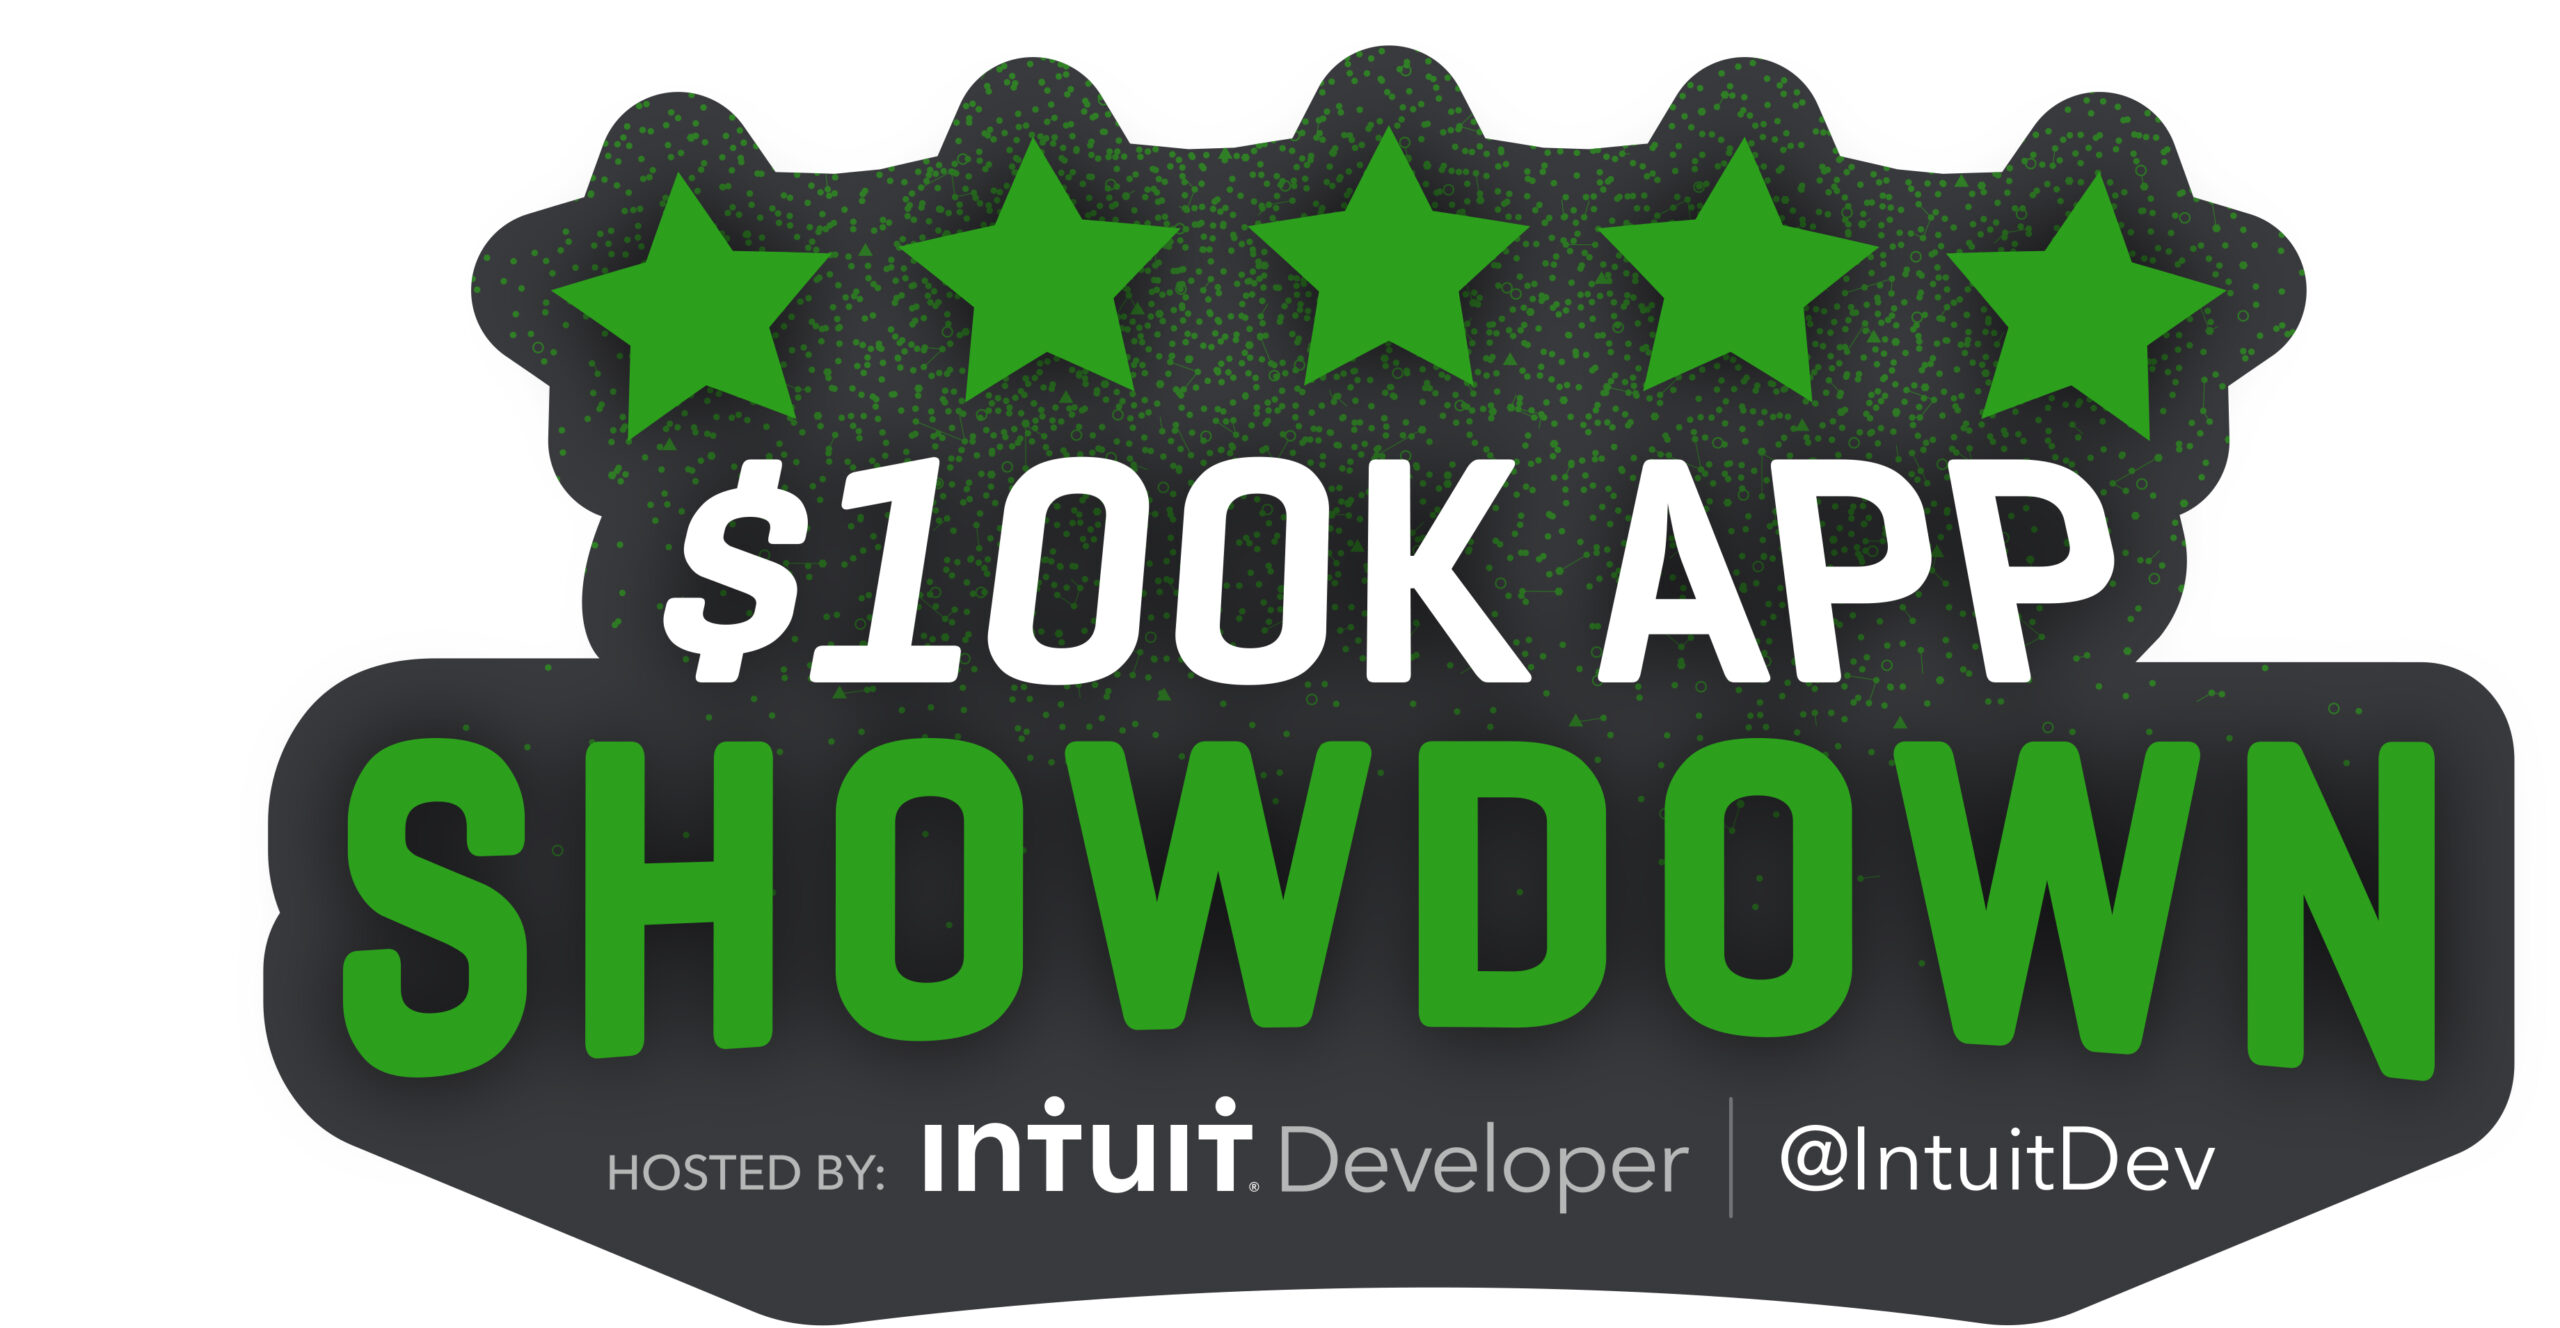 $100,000 App Contest Coming Soon!